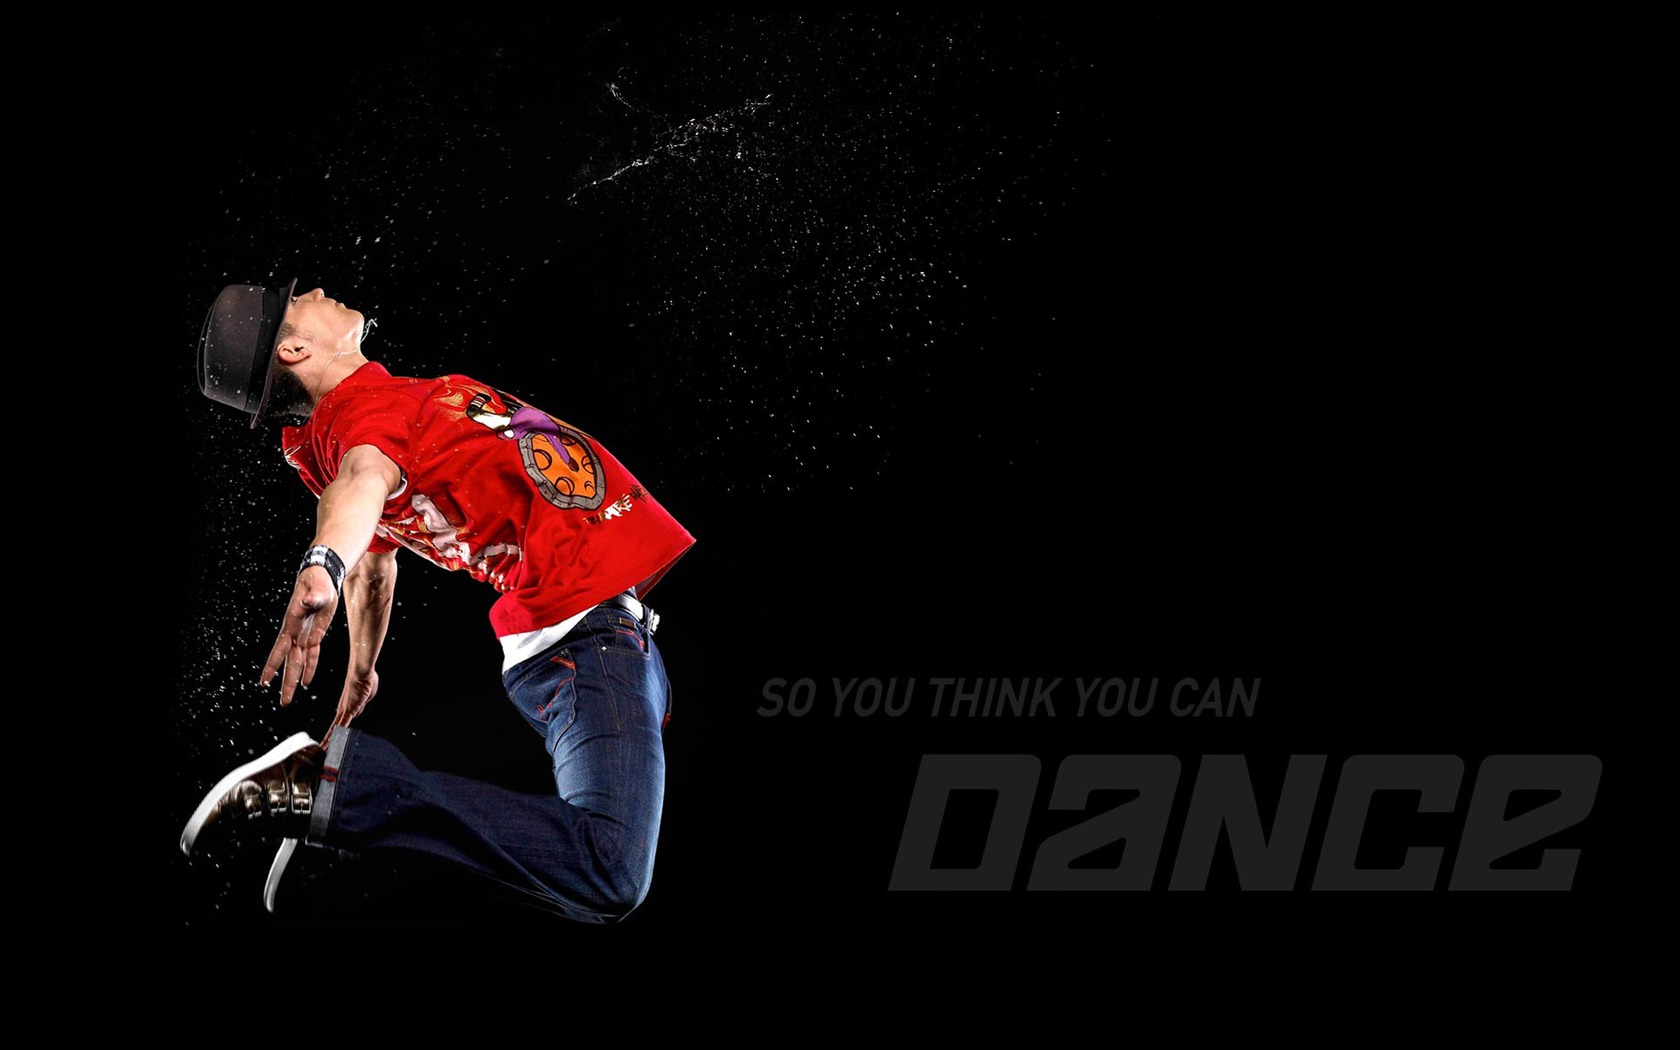 So You Think You Can Dance 舞林争霸 壁纸(一)6 - 1680x1050